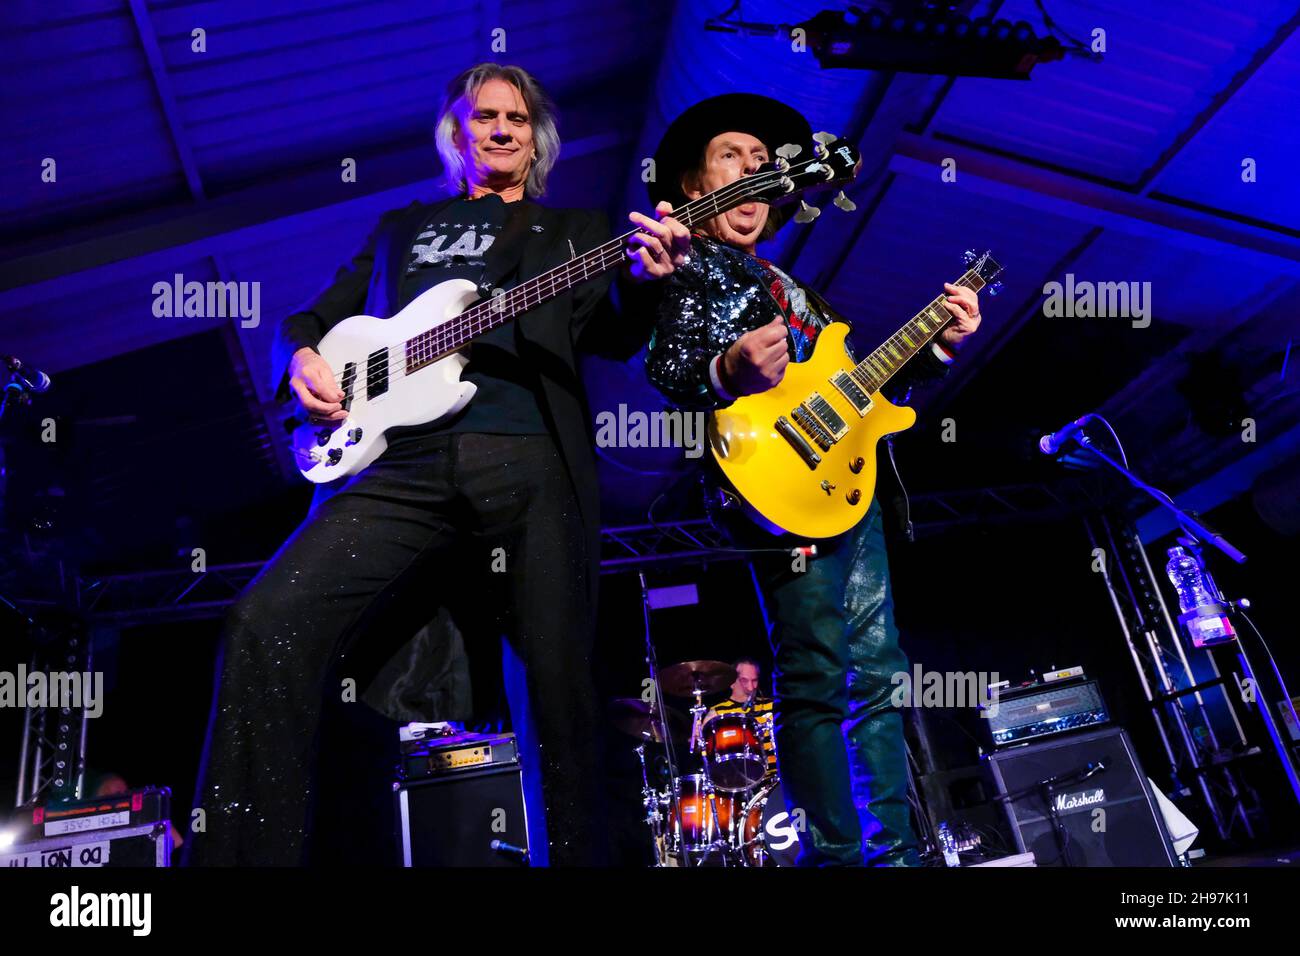 Southampton, UK. 4th Dec 2021. Guitarists and vocalists John Berry and Dave Hill with British glam rock band Slade, named most successful British group of the 1970s by the British Hit Singles & Albums, based on sales of singles, including Merry Xmas Everybody perform at the Engine Rooms Southampton. (Photo by Dawn Fletcher-Park / SOPA Images/Sipa USA) Credit: Sipa US/Alamy Live News Stock Photo